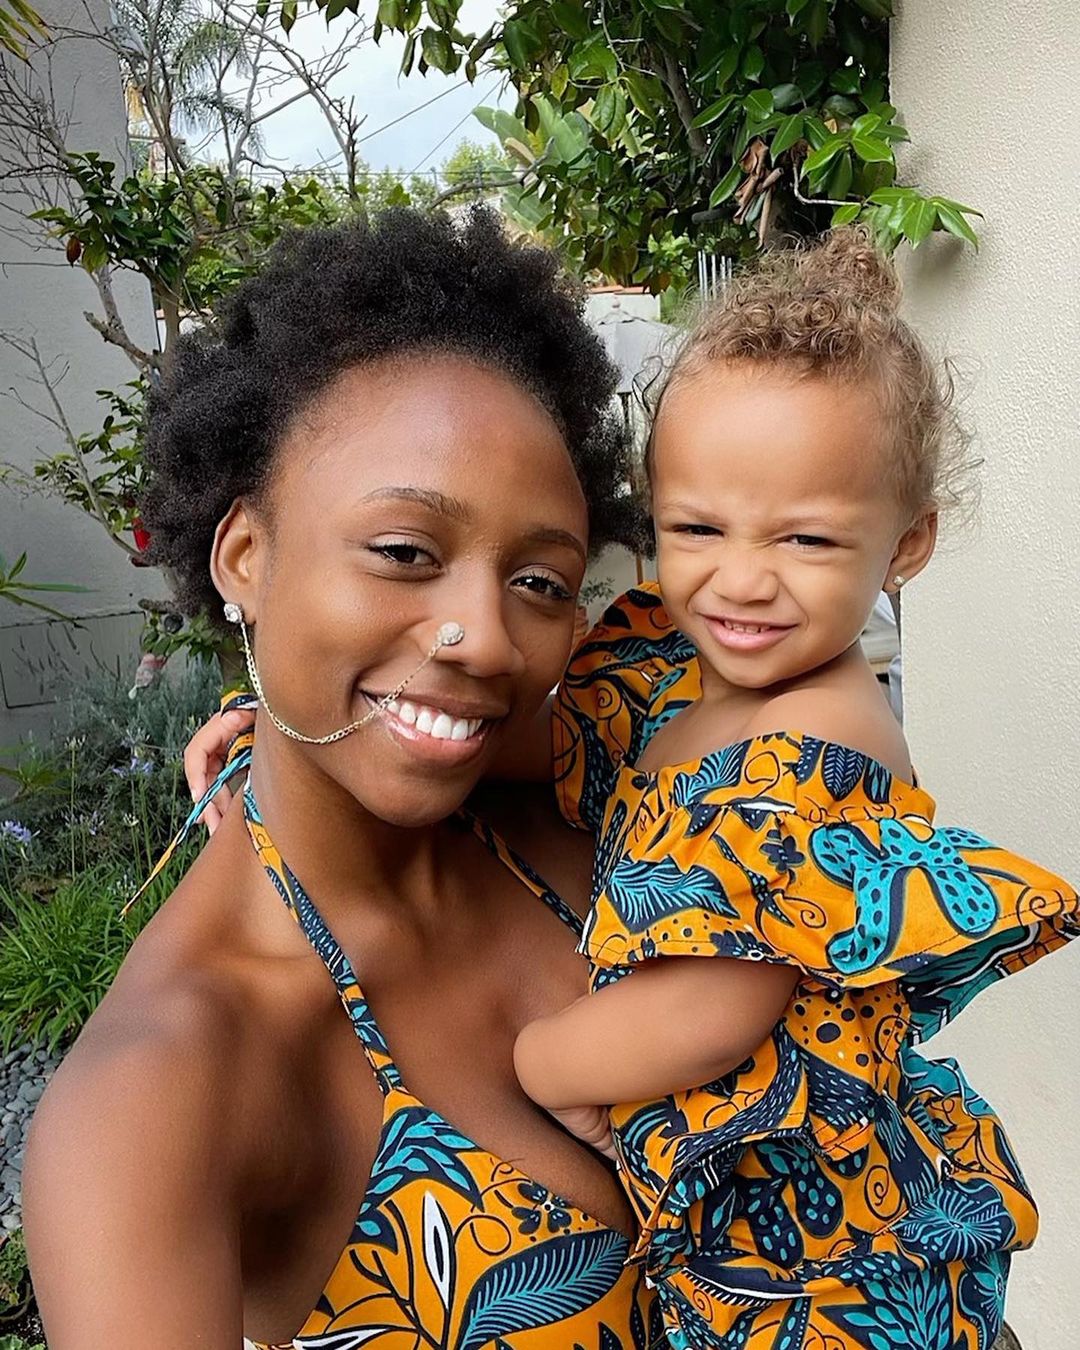 "My daughter June is missing" – Korra Obidi cries out, accuses ex-husband Justin Dean